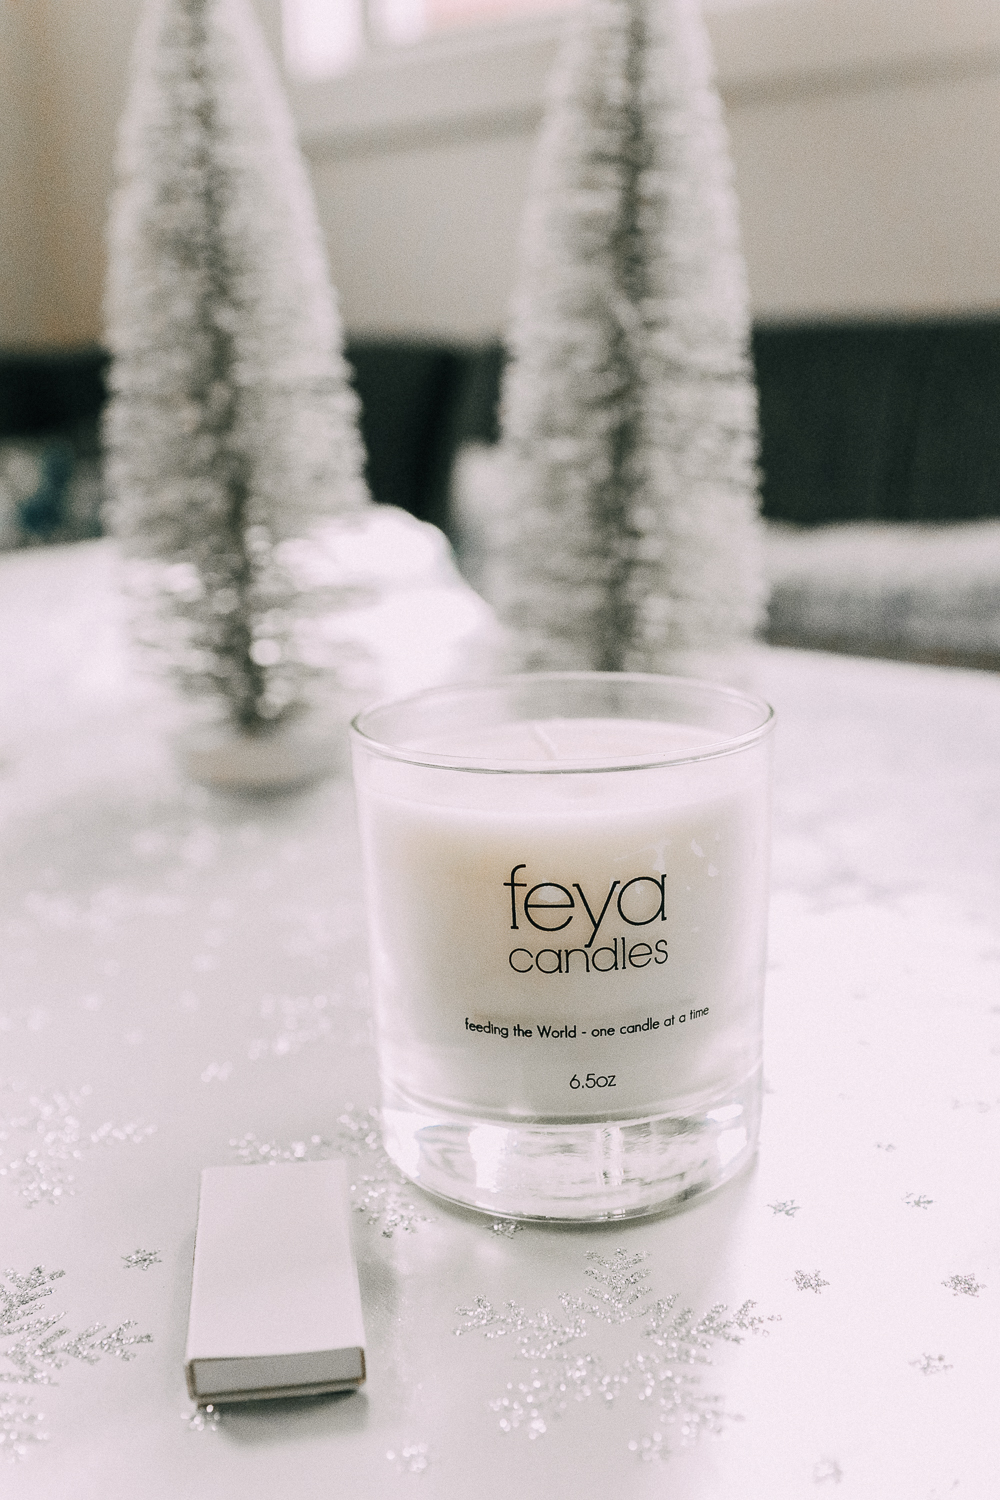 holiday gifts from JCPenney featuring a Feya holiday cheer boxed soy candle